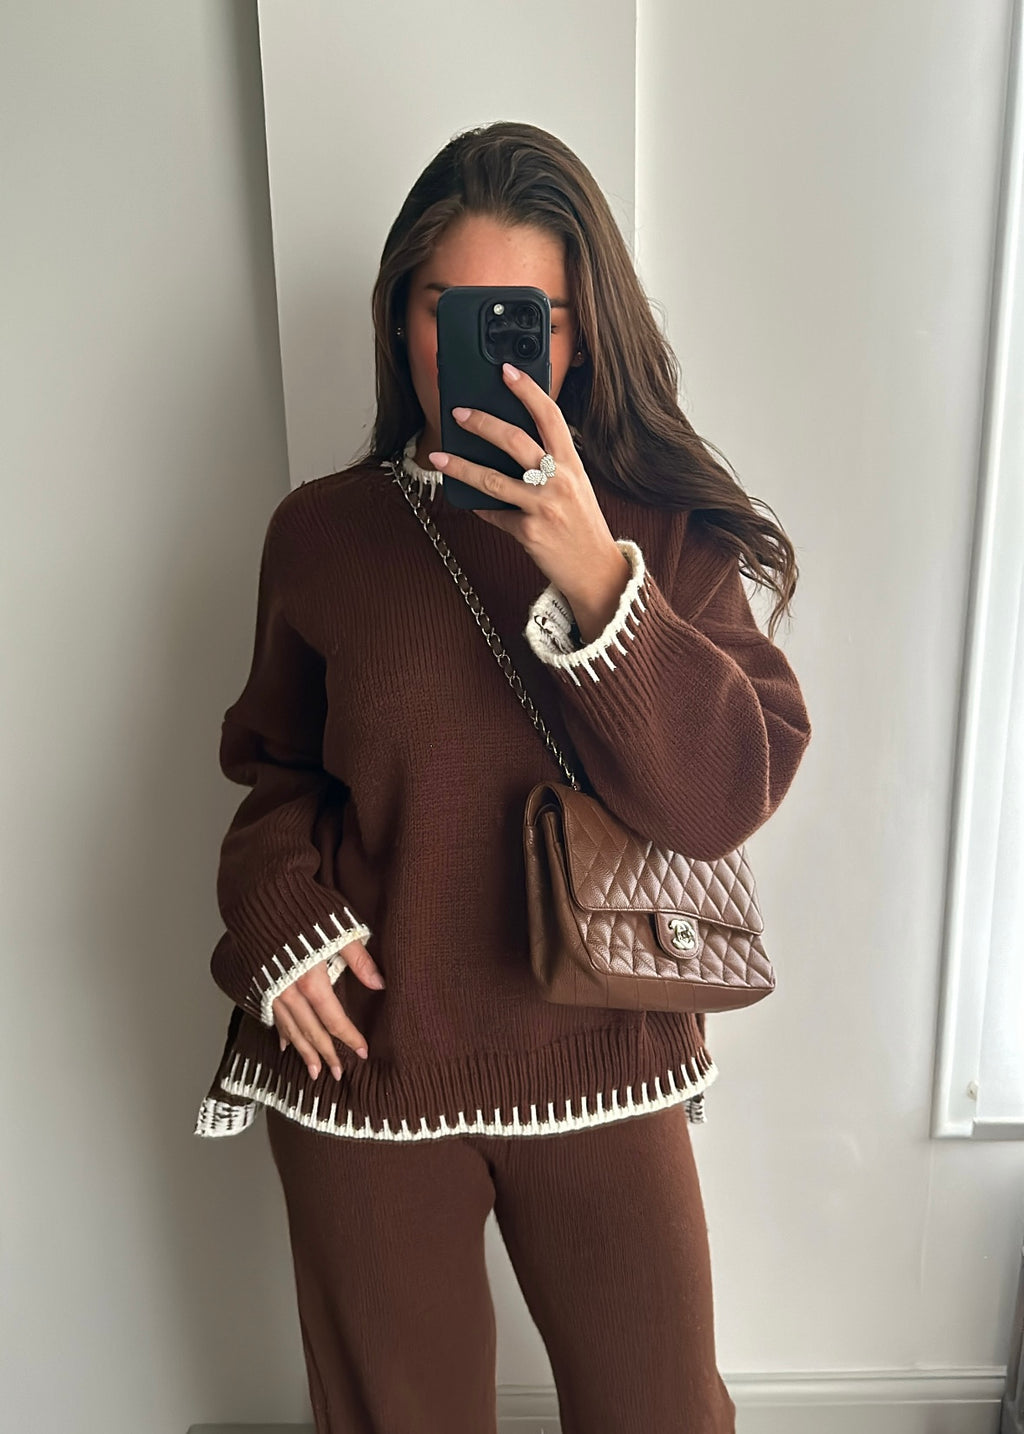 Clothing : Tops : 'Lorna' Chocolate Fluffy Knit Crop Top